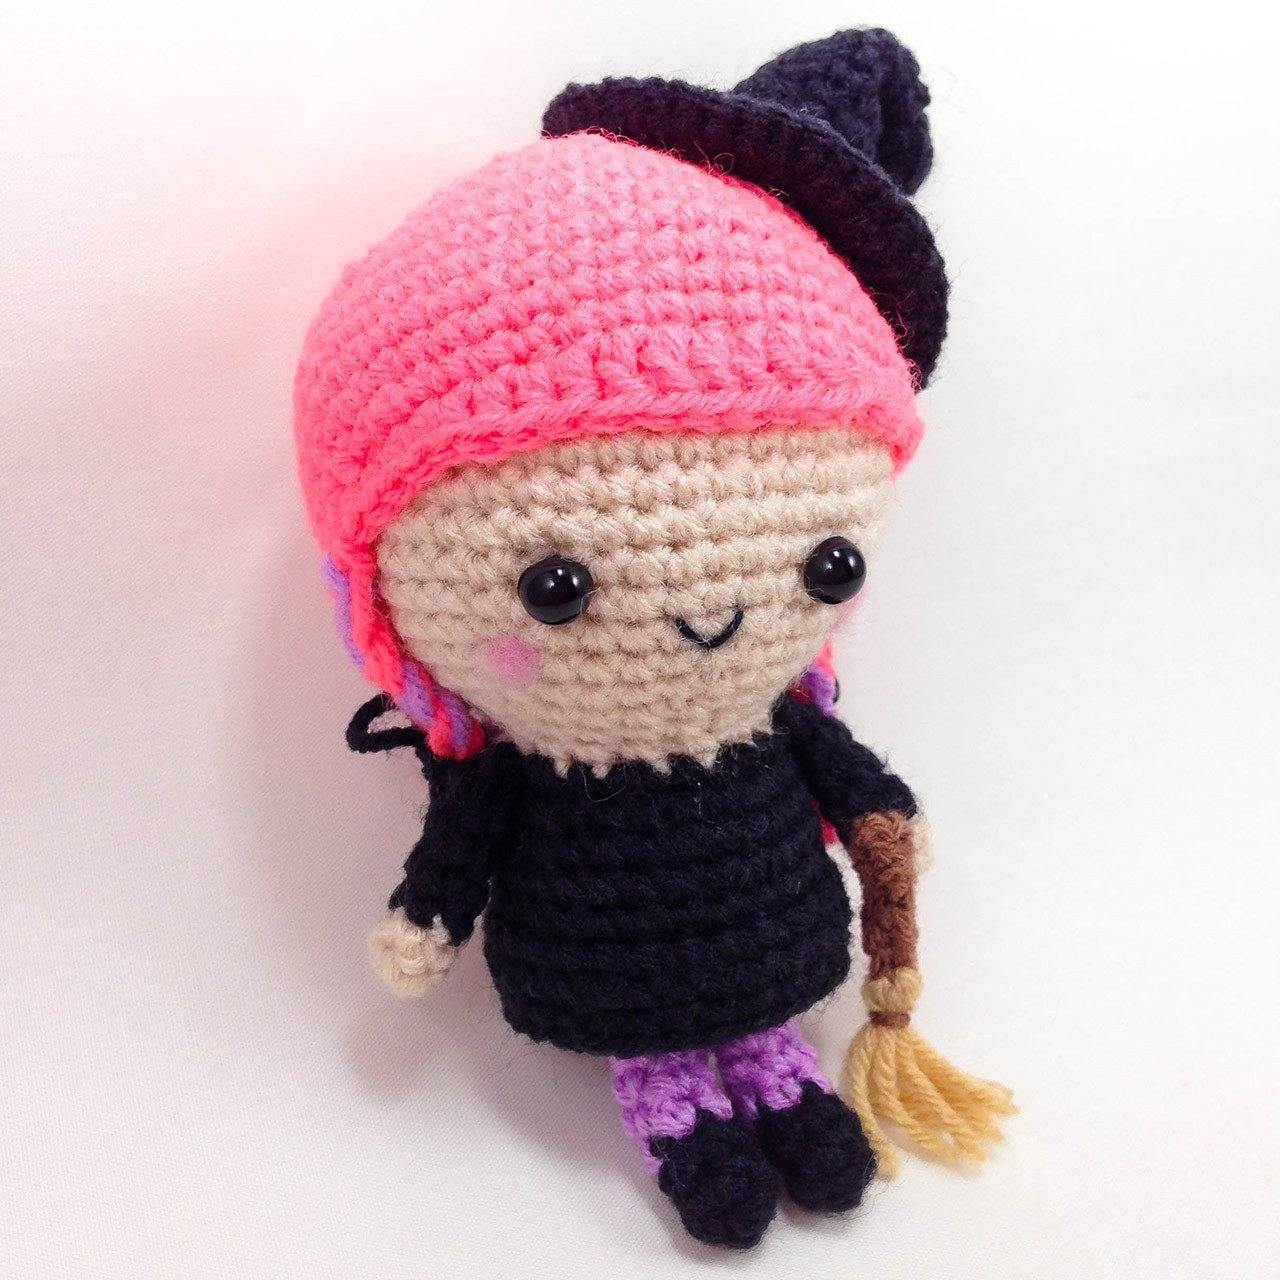 Crochet witch doll for halloween